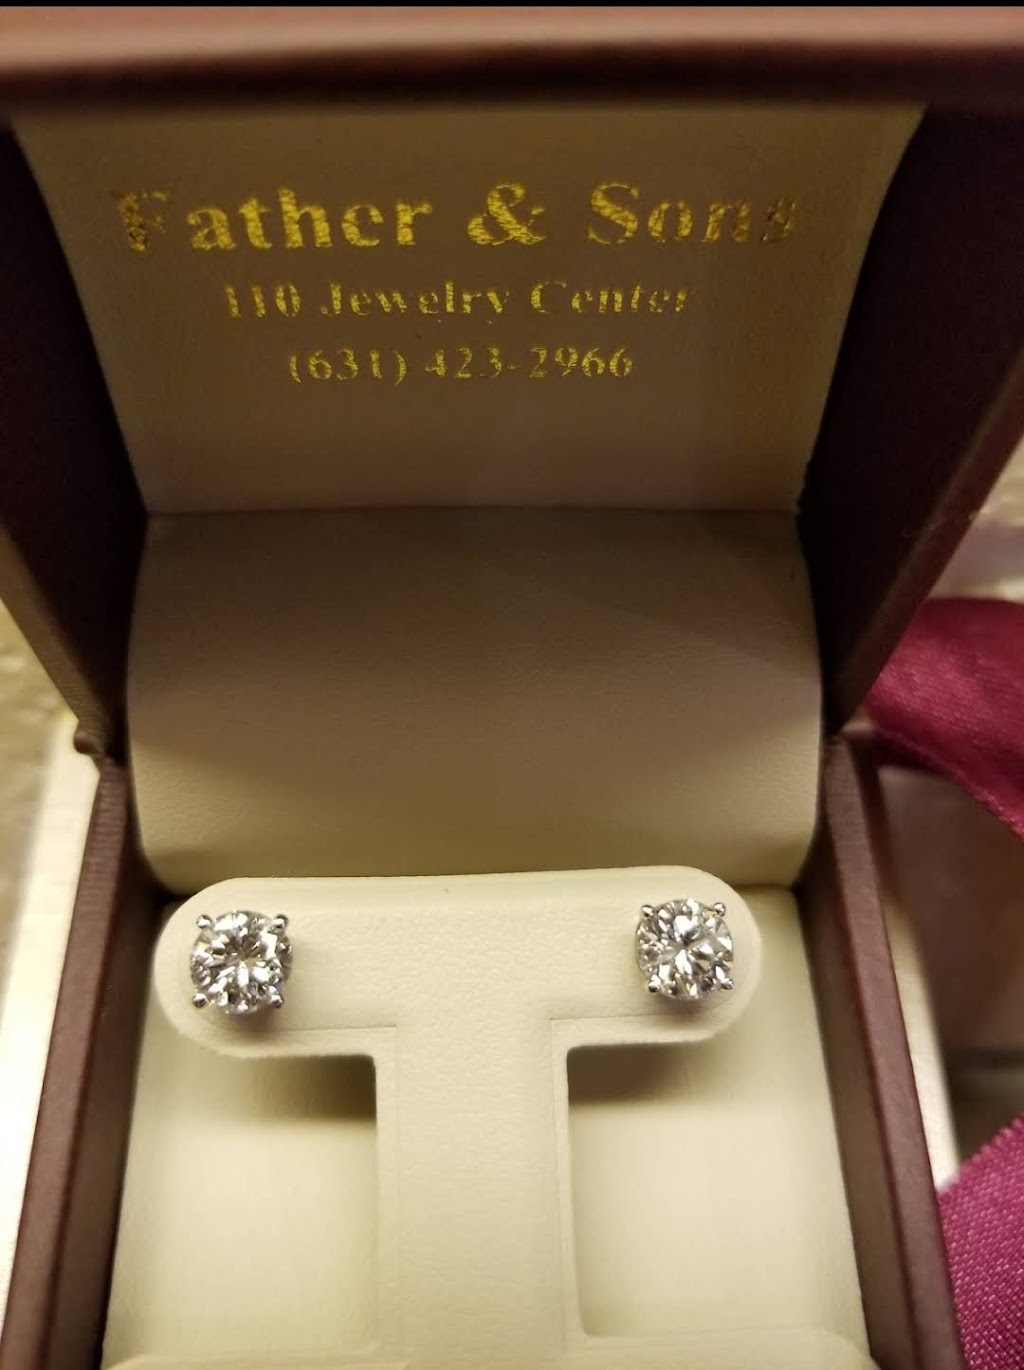 Father & Sons 110 Jewelry Center | 829 Walt Whitman Rd, Melville, NY 11747 | Phone: (631) 423-2966